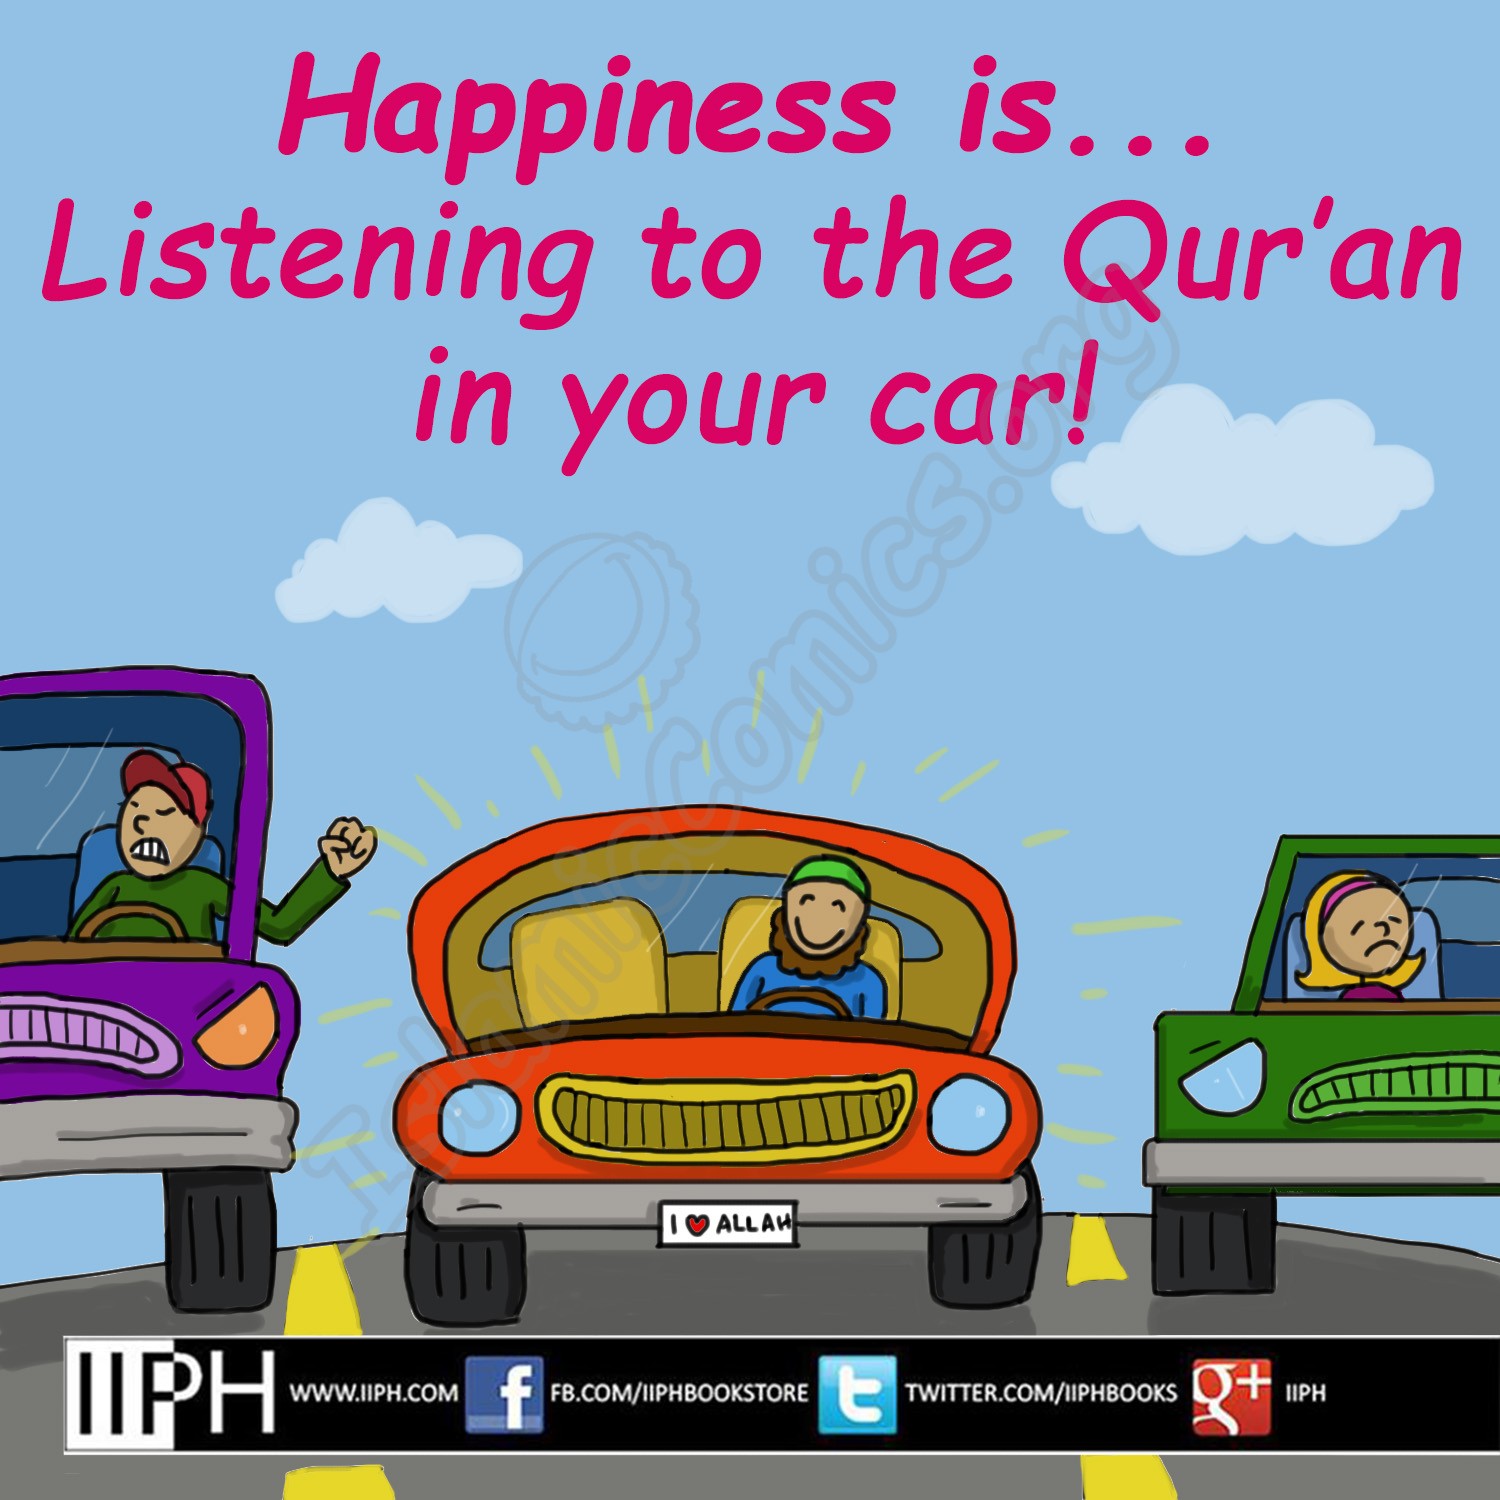 Happiness is listening to the Quran in your car - Islamic Illustrations (Islamic Comics)